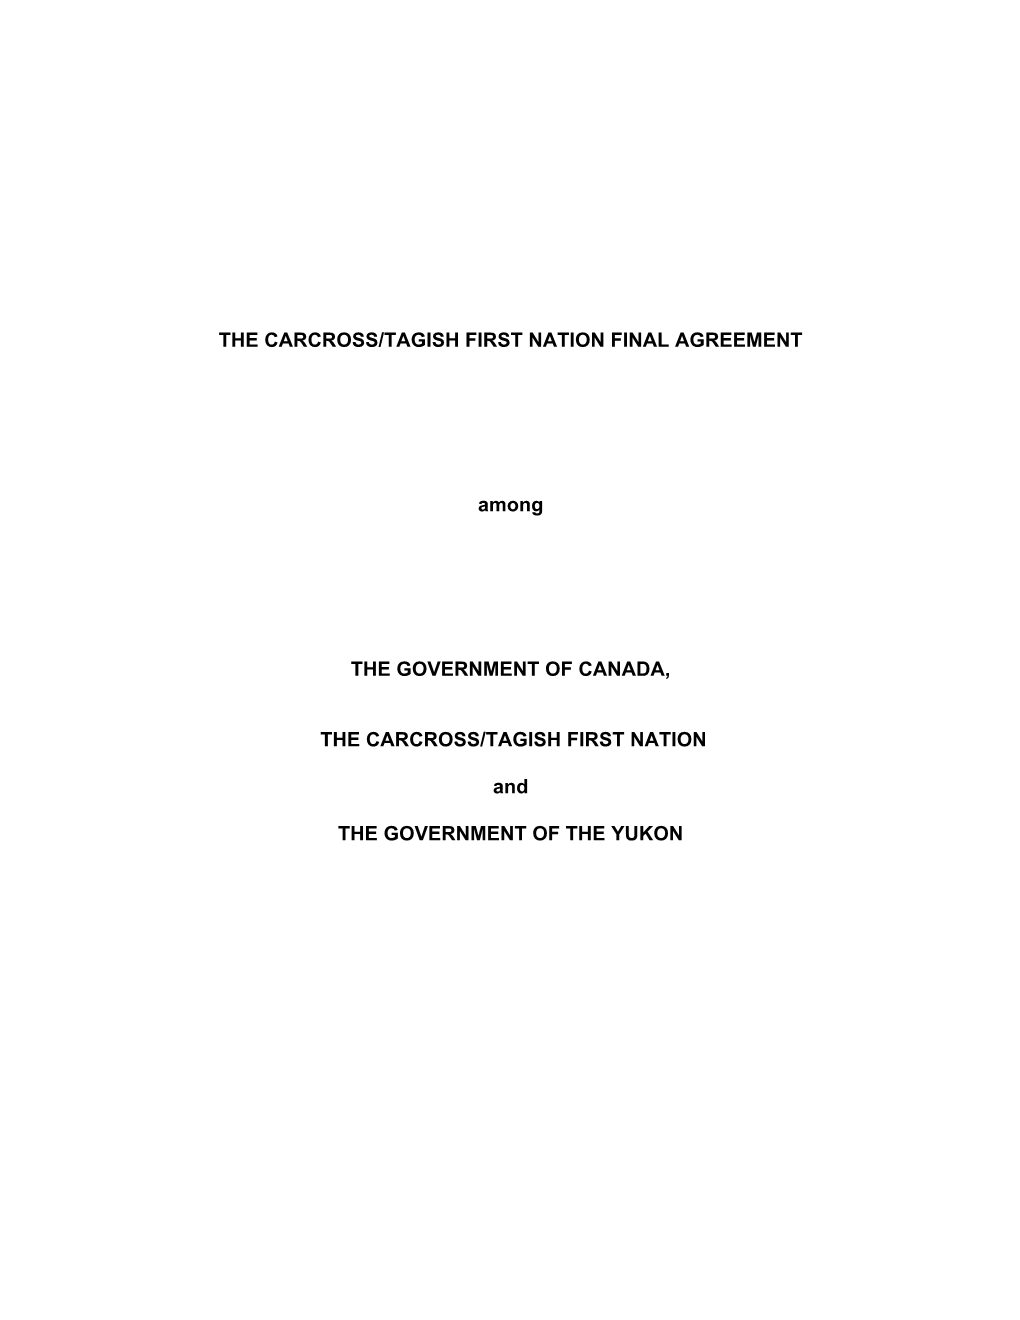 The Carcross/Tagish First Nation Final Agreement